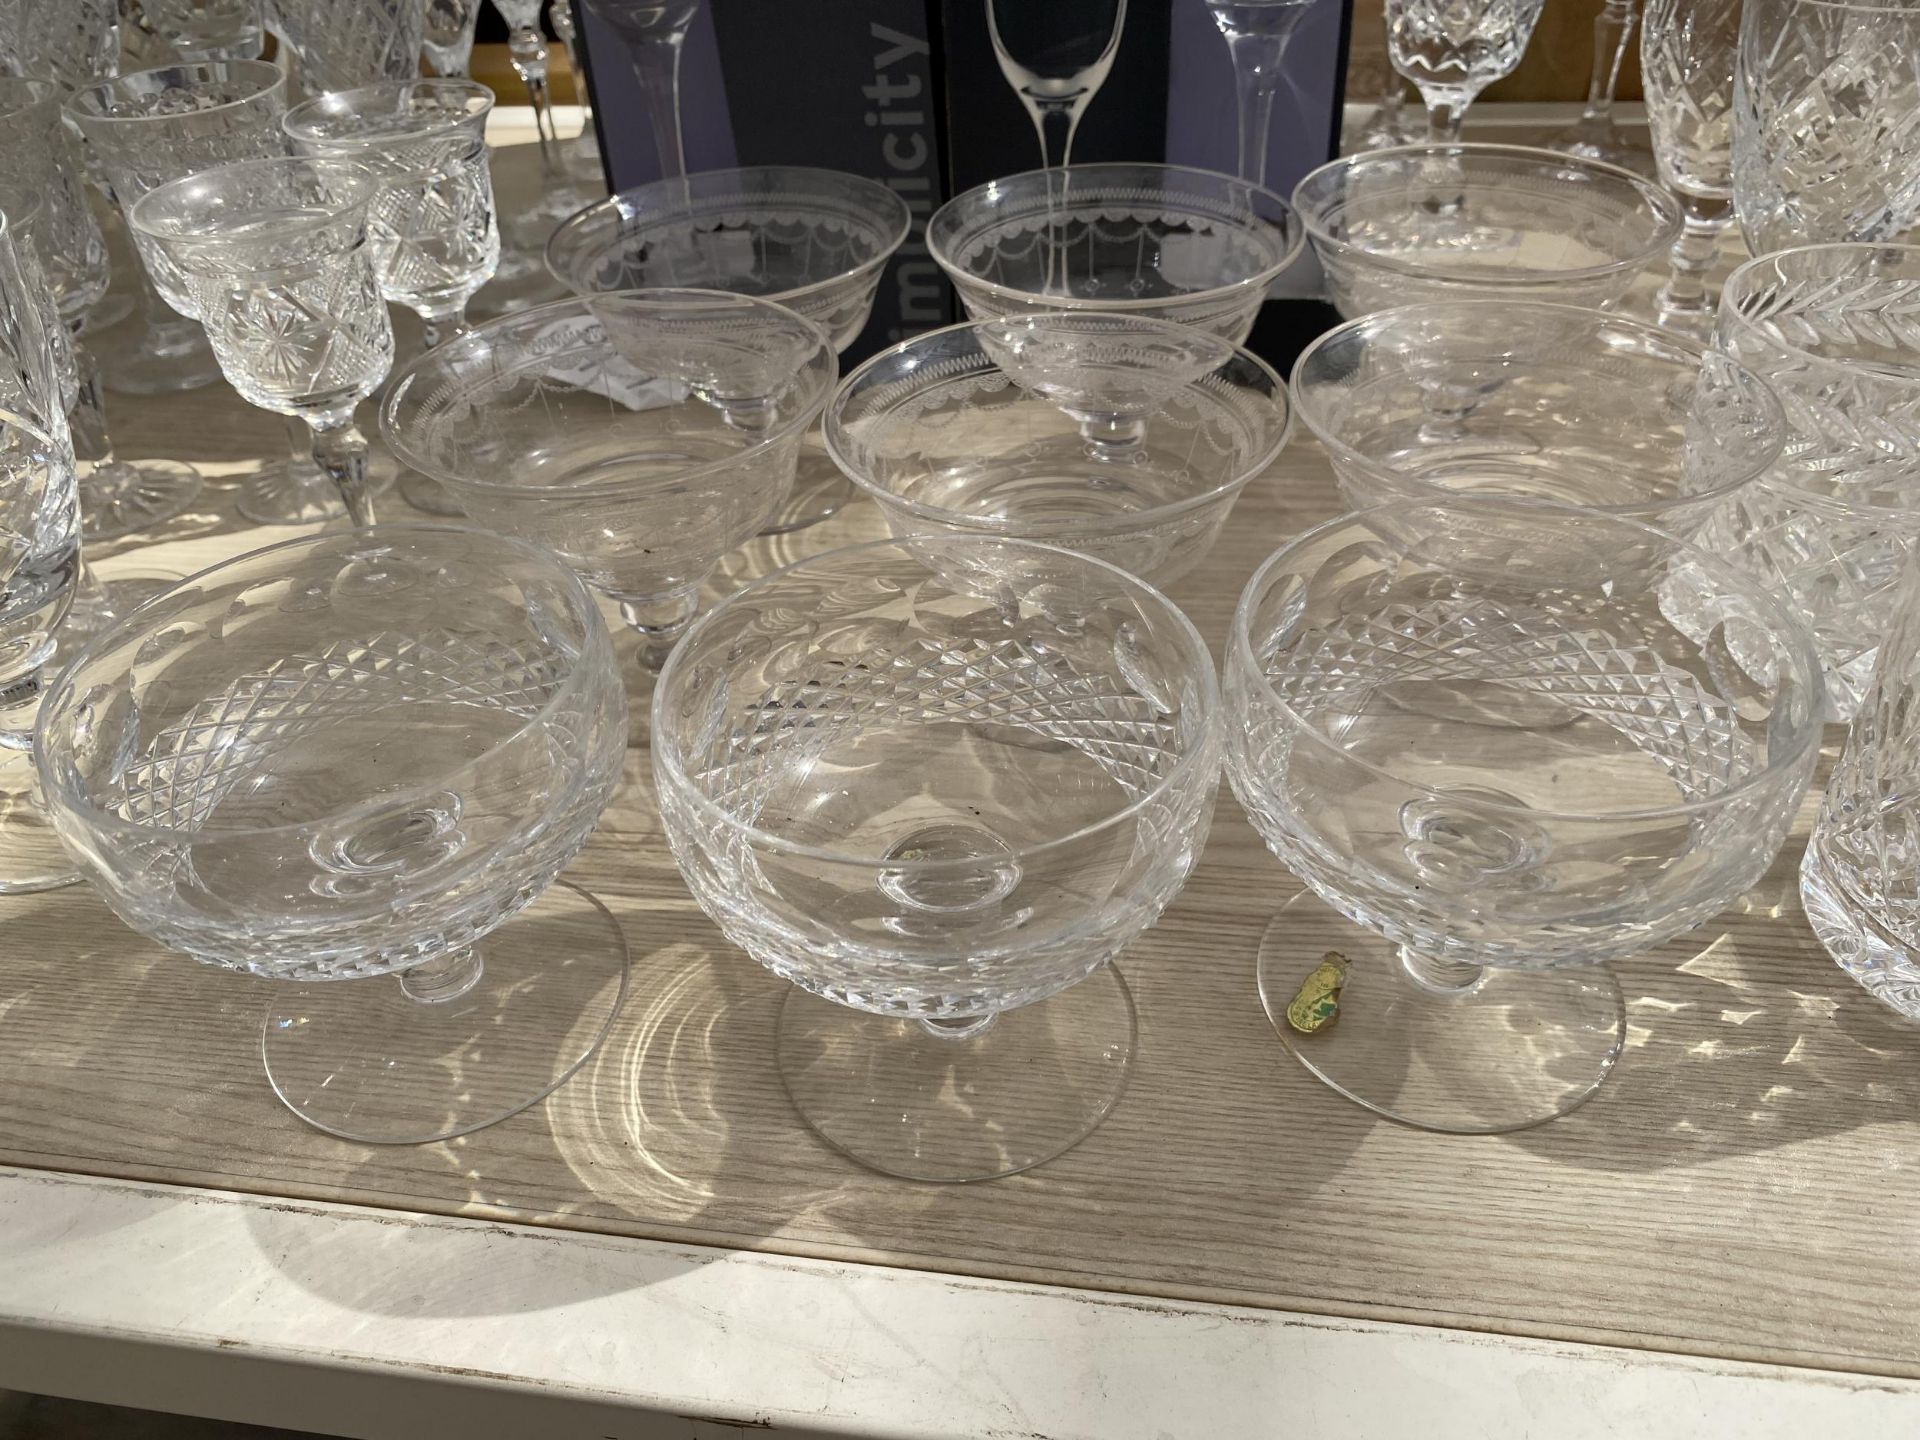 A LARGE QUANTITY OF ASSORTED GLASS WARE TO INCLUDE CHAMPAGNE FLUTES, WHISKET TUMBLERS AND WINE - Image 8 of 8